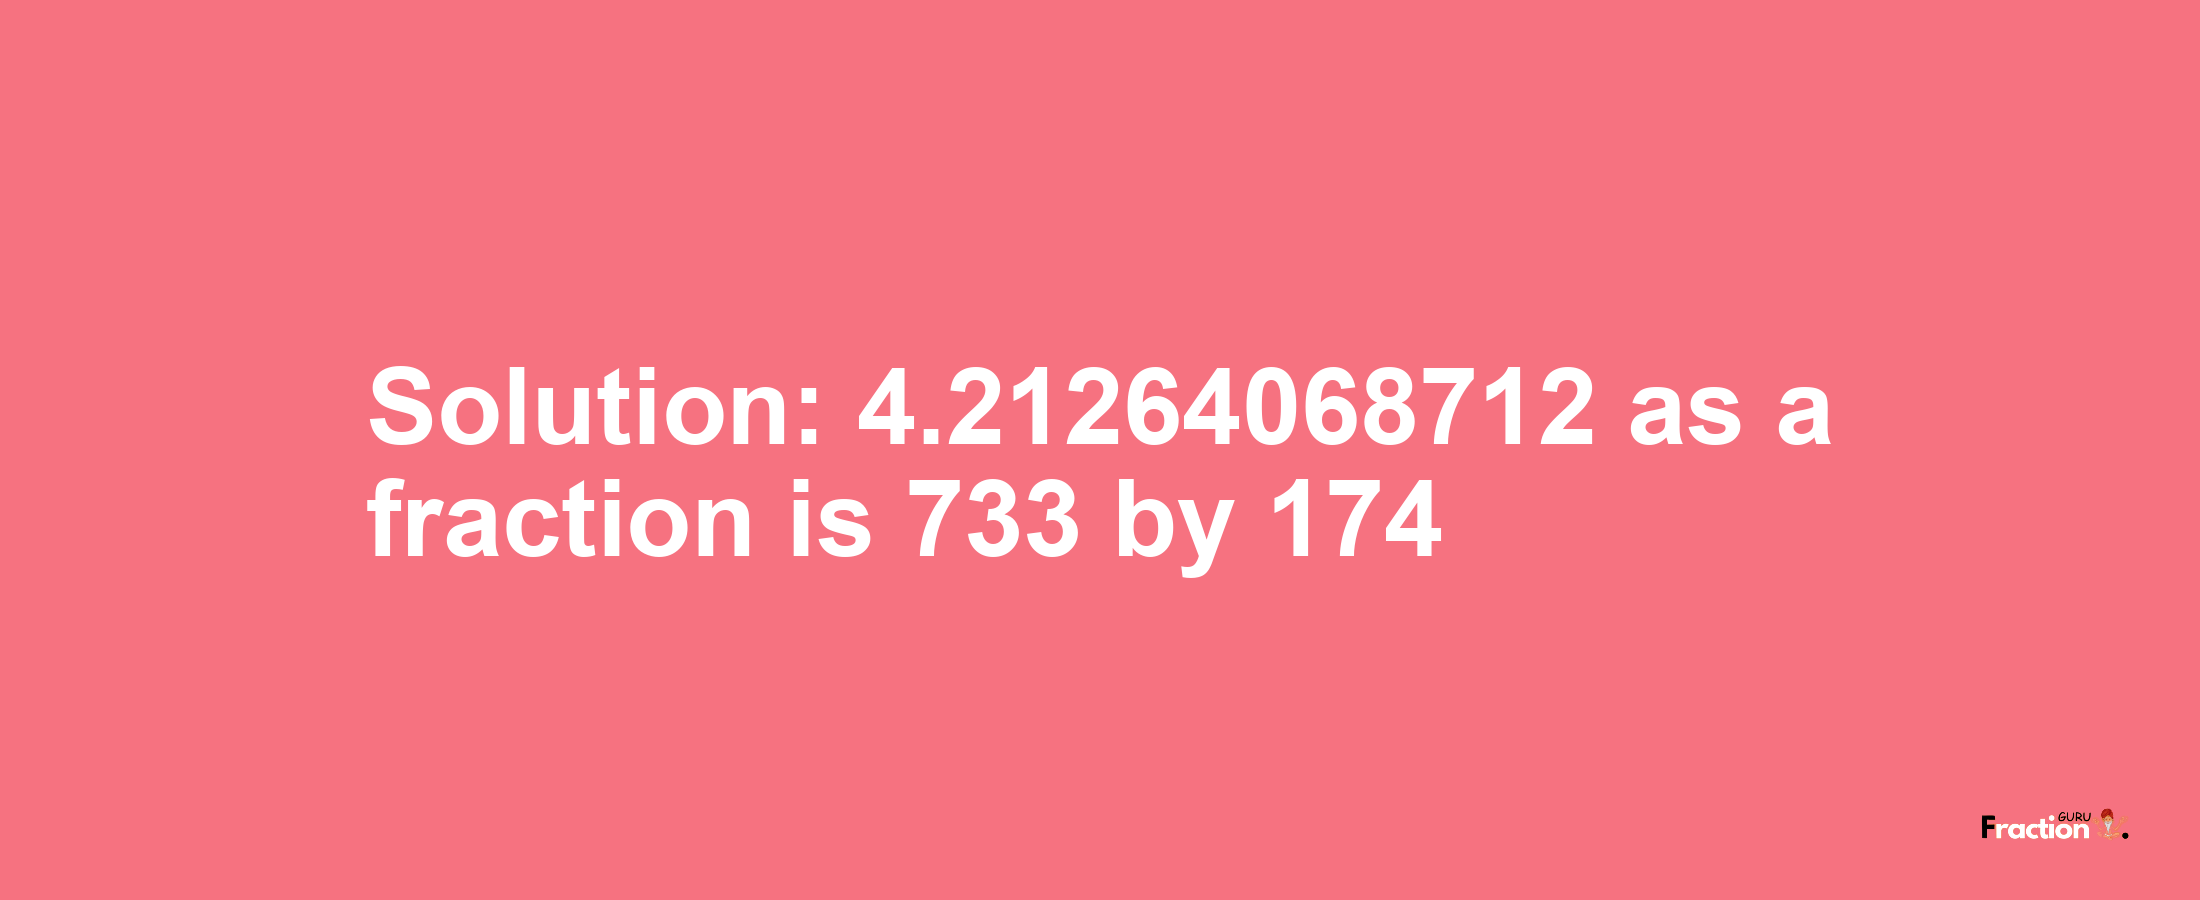 Solution:4.21264068712 as a fraction is 733/174